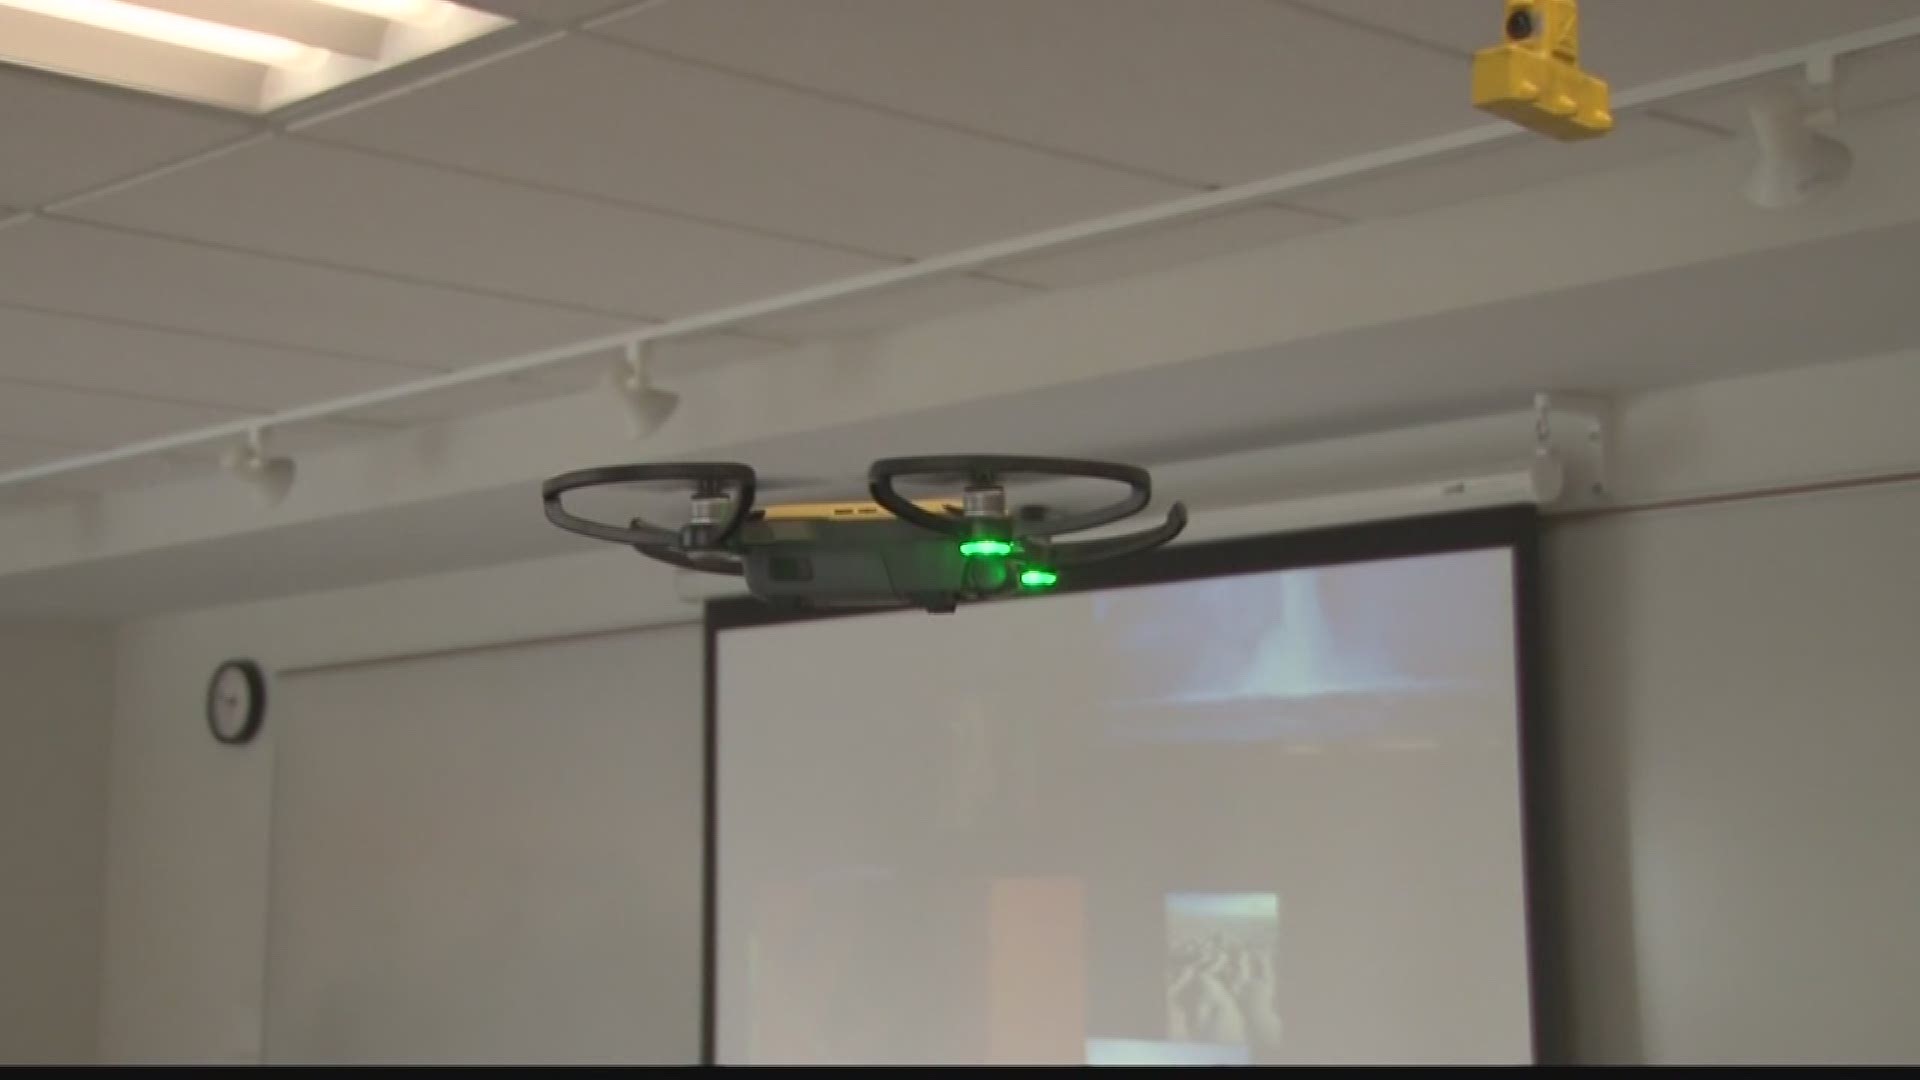 channel 2's jennifer stanonis went to Canisius high school and shows us all the new gadgets.